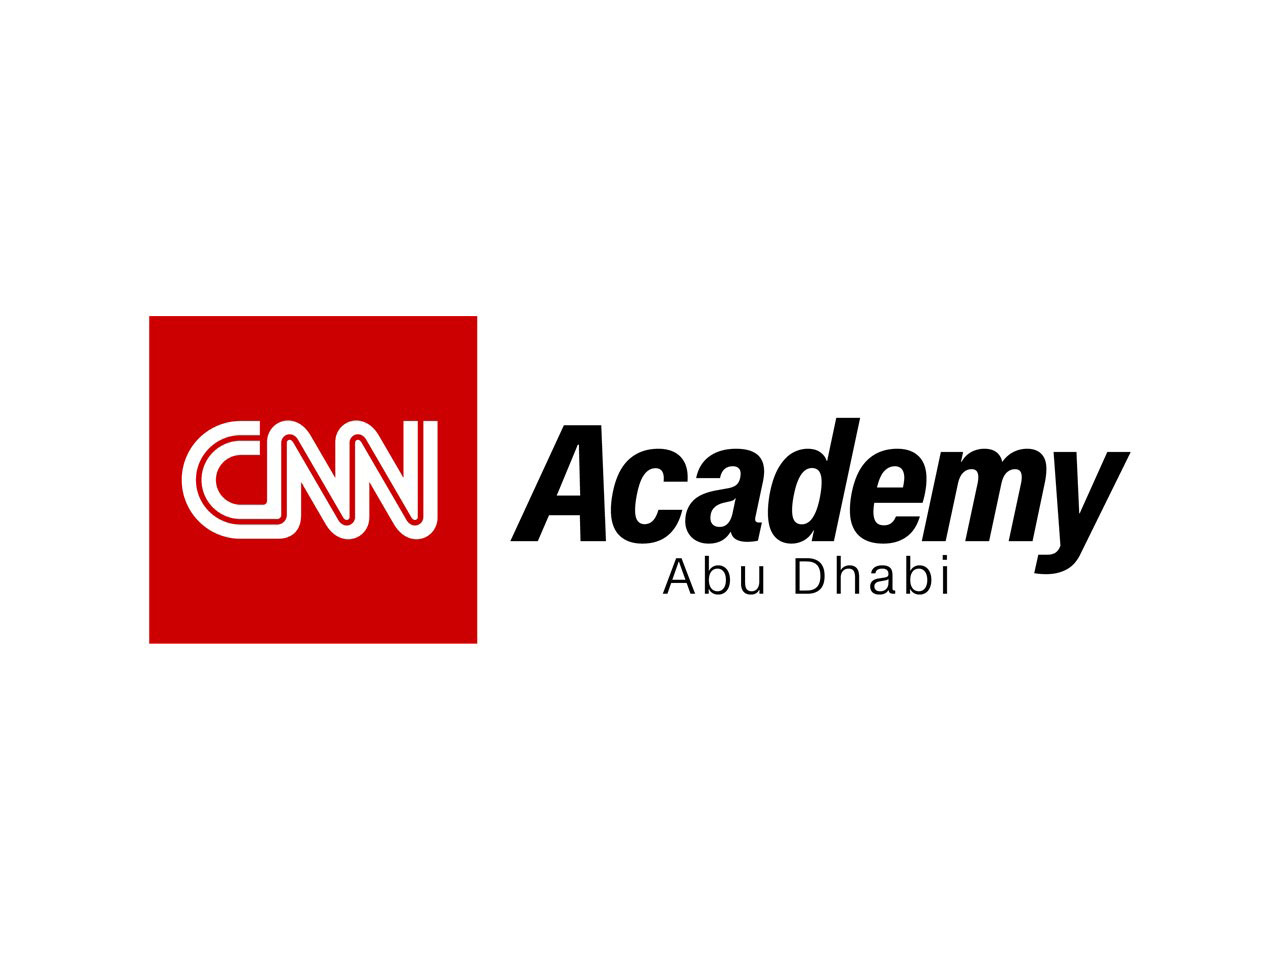 CNN Academy Abu Dhabi opens for applications to train next generation of journalists